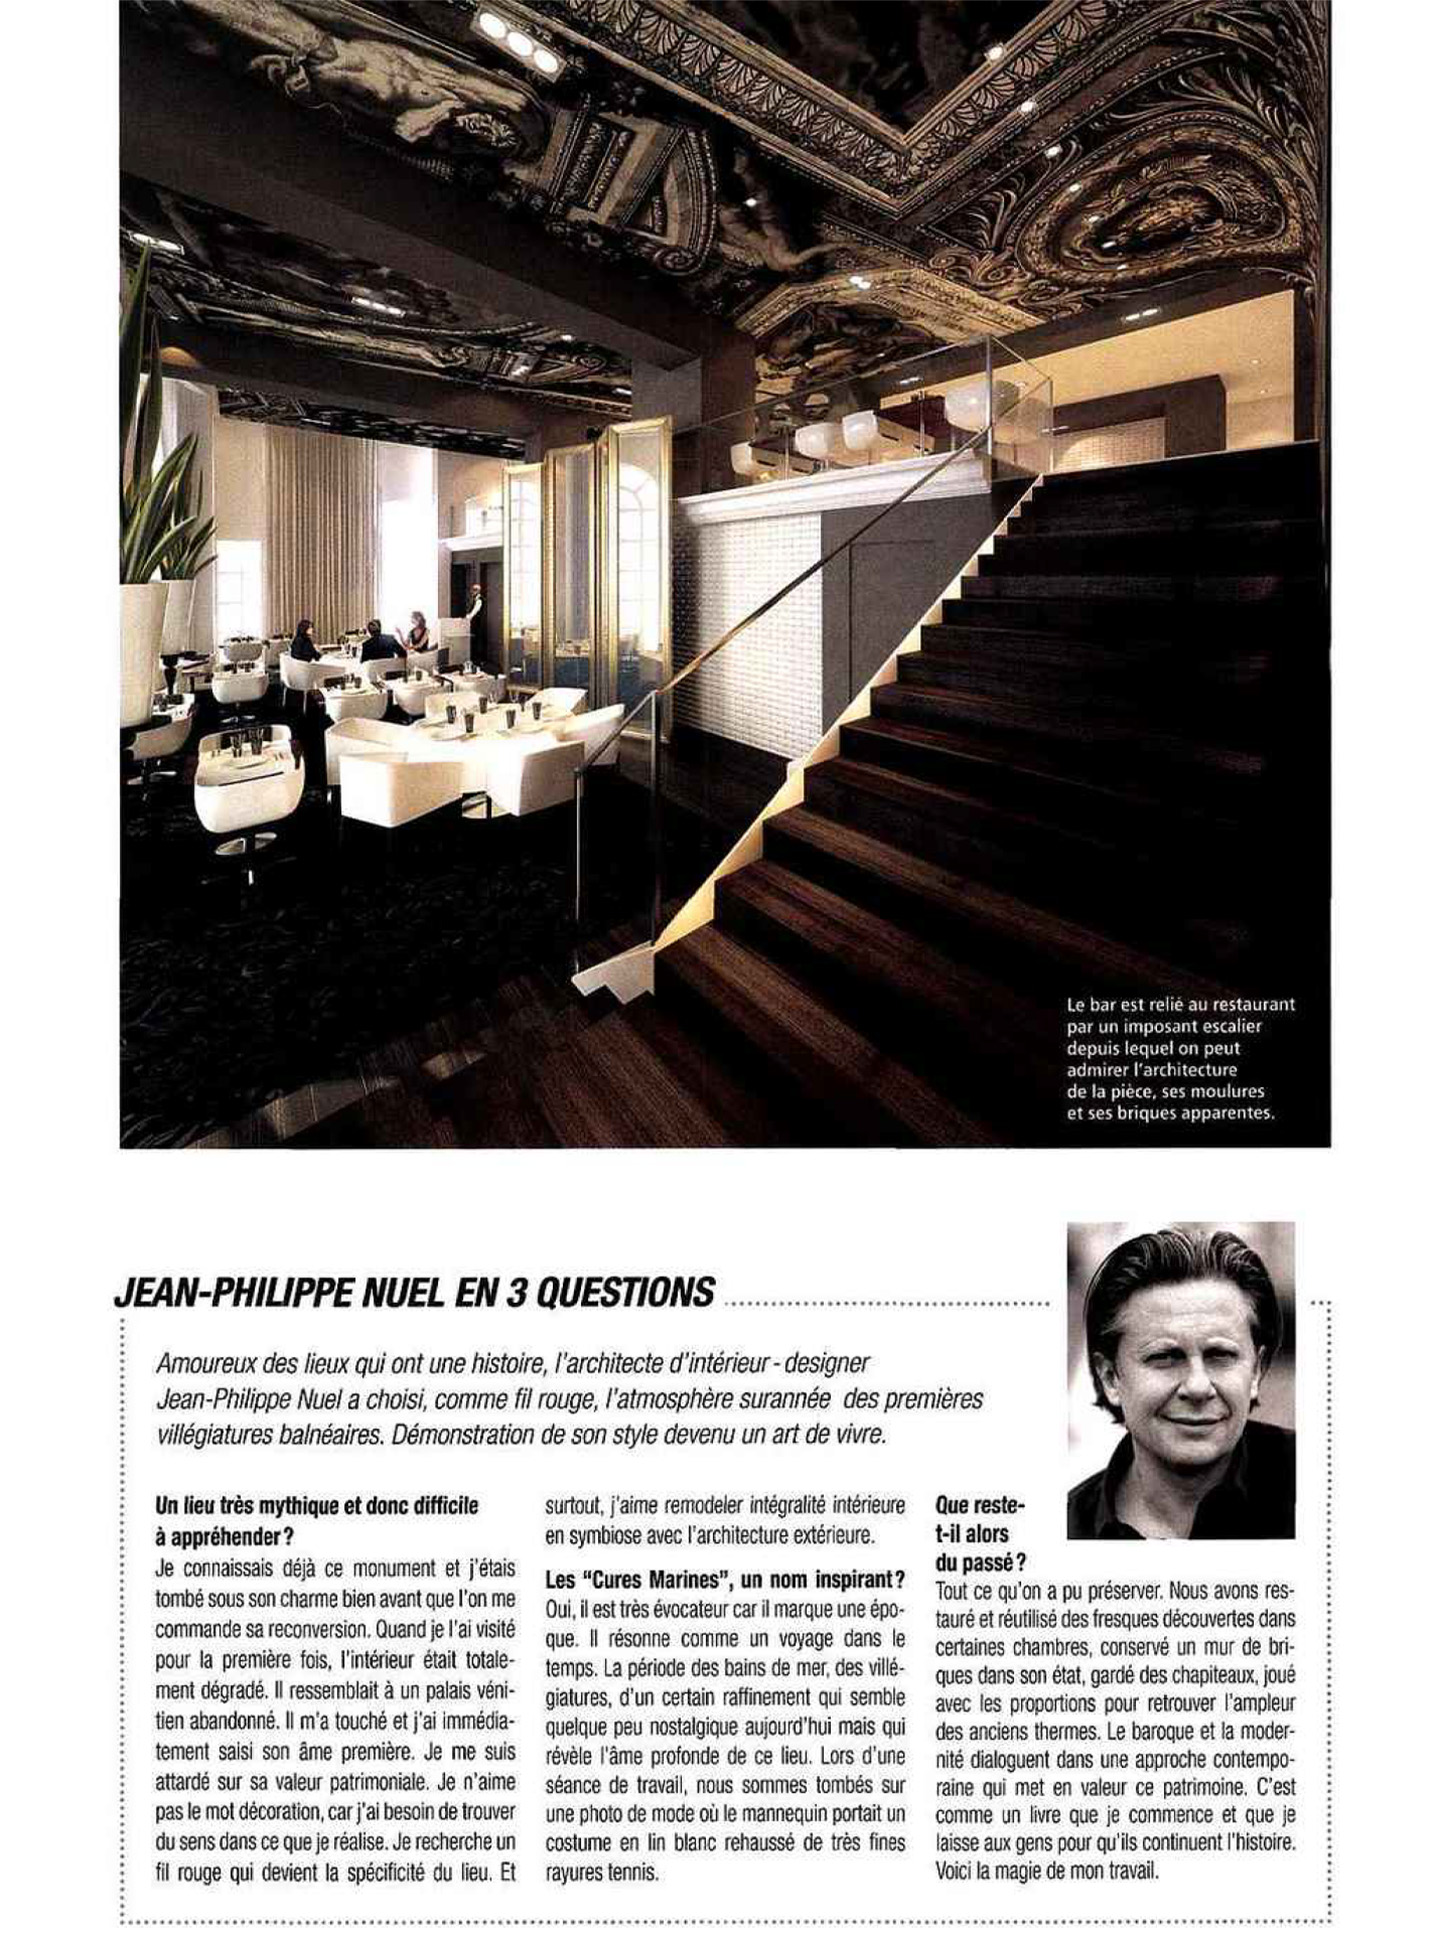 article on the marine cures of trouville in the magazine hotel & lodge, luxury hotel and spa by the architecture studio jean-philippe nuel